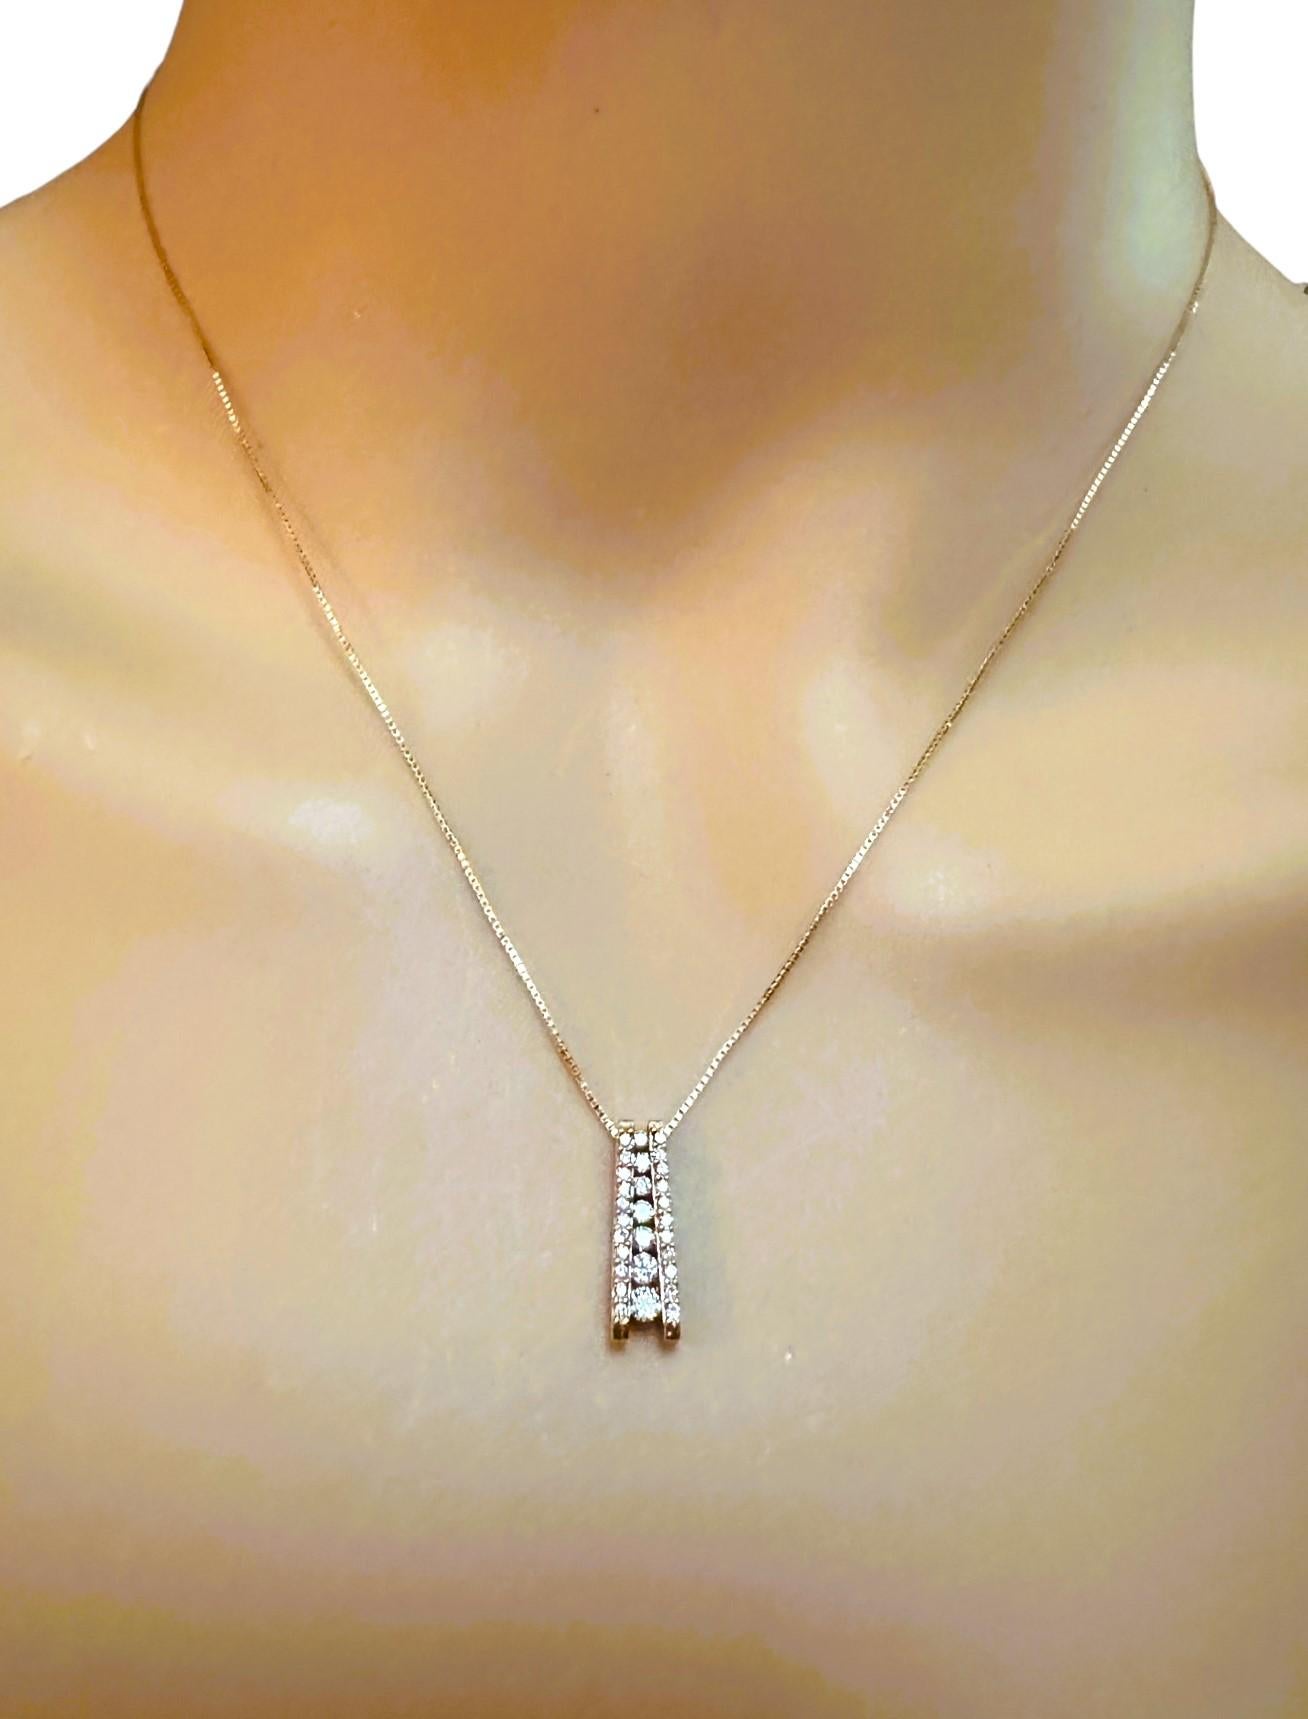 I just love this necklace!  The design is just so cool.  It has 28 brilliant cut diamonds measuring from 3.00 x 3.00 x 2.50 mm to 1.5 x 1.5 x 1.2 mm.  The Clarity is SI1 and the Color is H-I.  They total .75 cts.  The pendant is stamped 